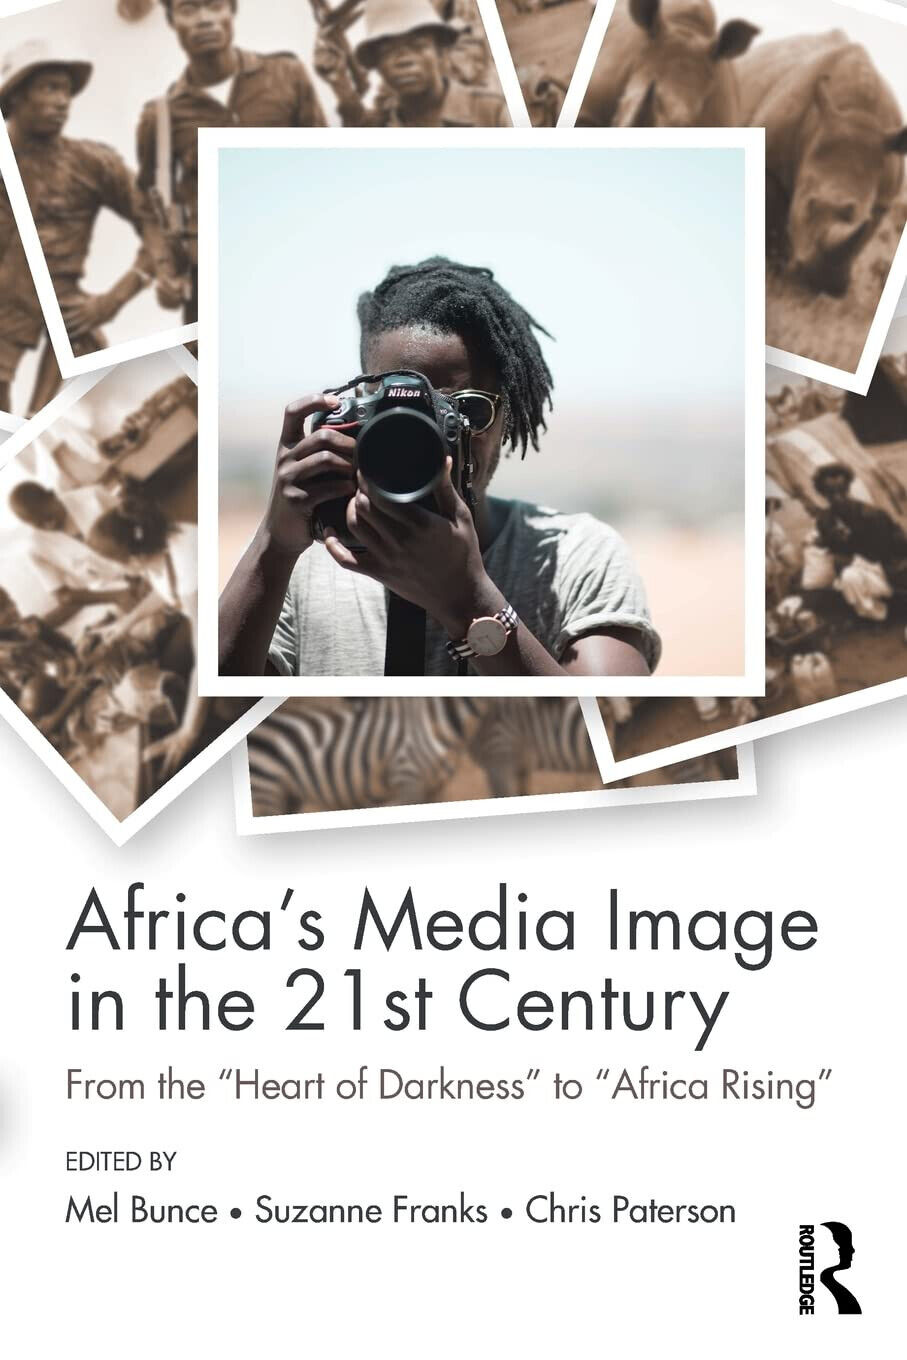 Africa's Media Image in the 21st Century - Mel Bunce - Routledge, 2016 libro usato